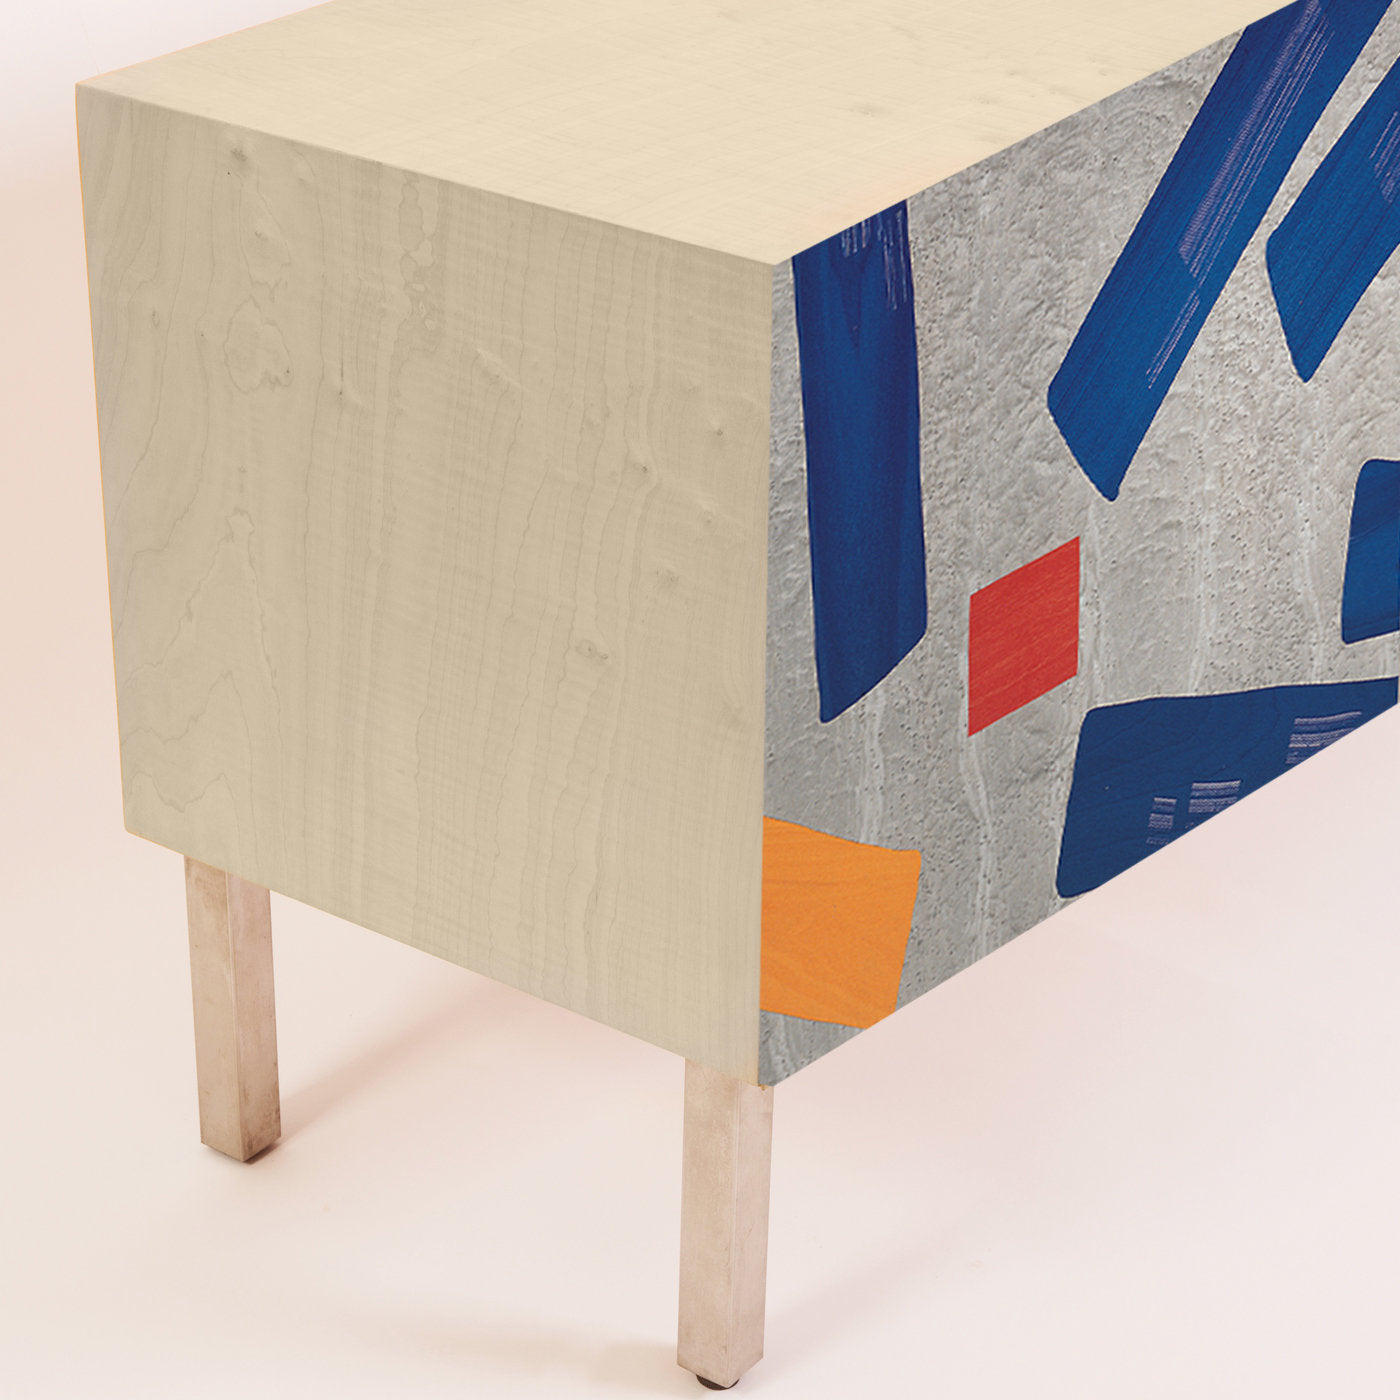 Intarsia Sideboard by Hsiao Chin - Alternative view 1